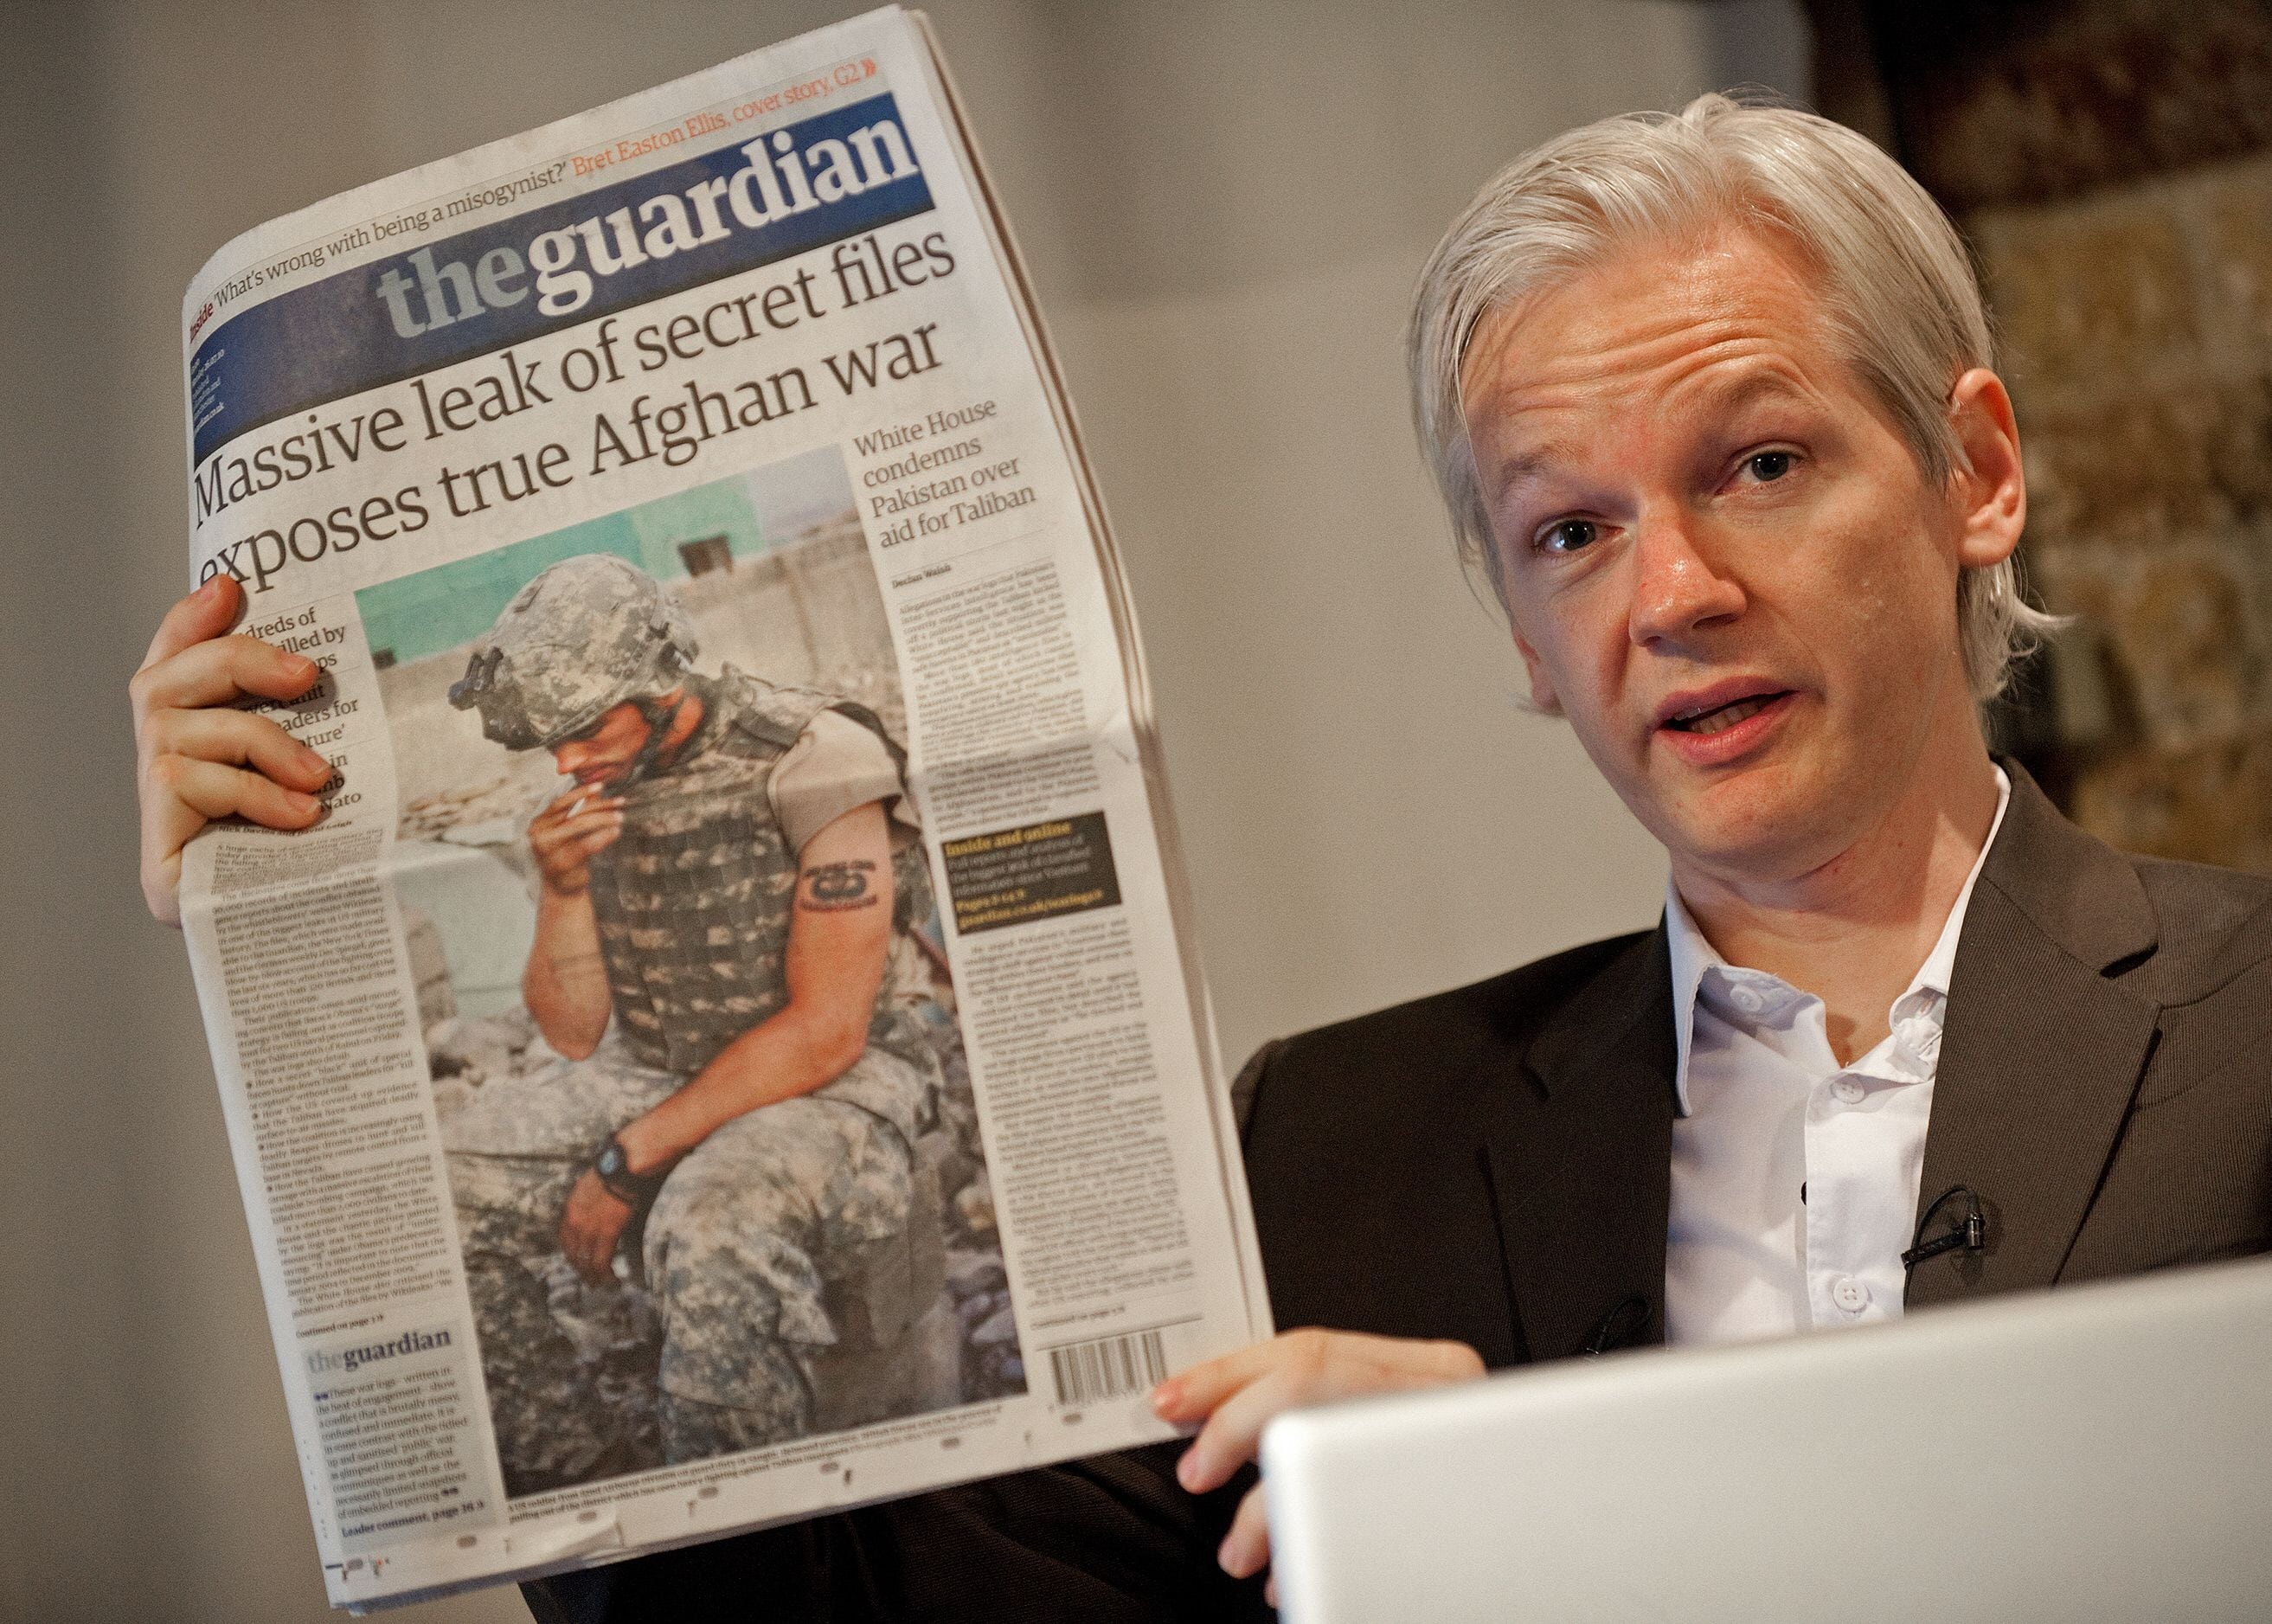 Julian Assange holds a copy of The Guardian newspaper during a press conference in London on July 26, 2010. (Photo by LEON NEAL/AFP).